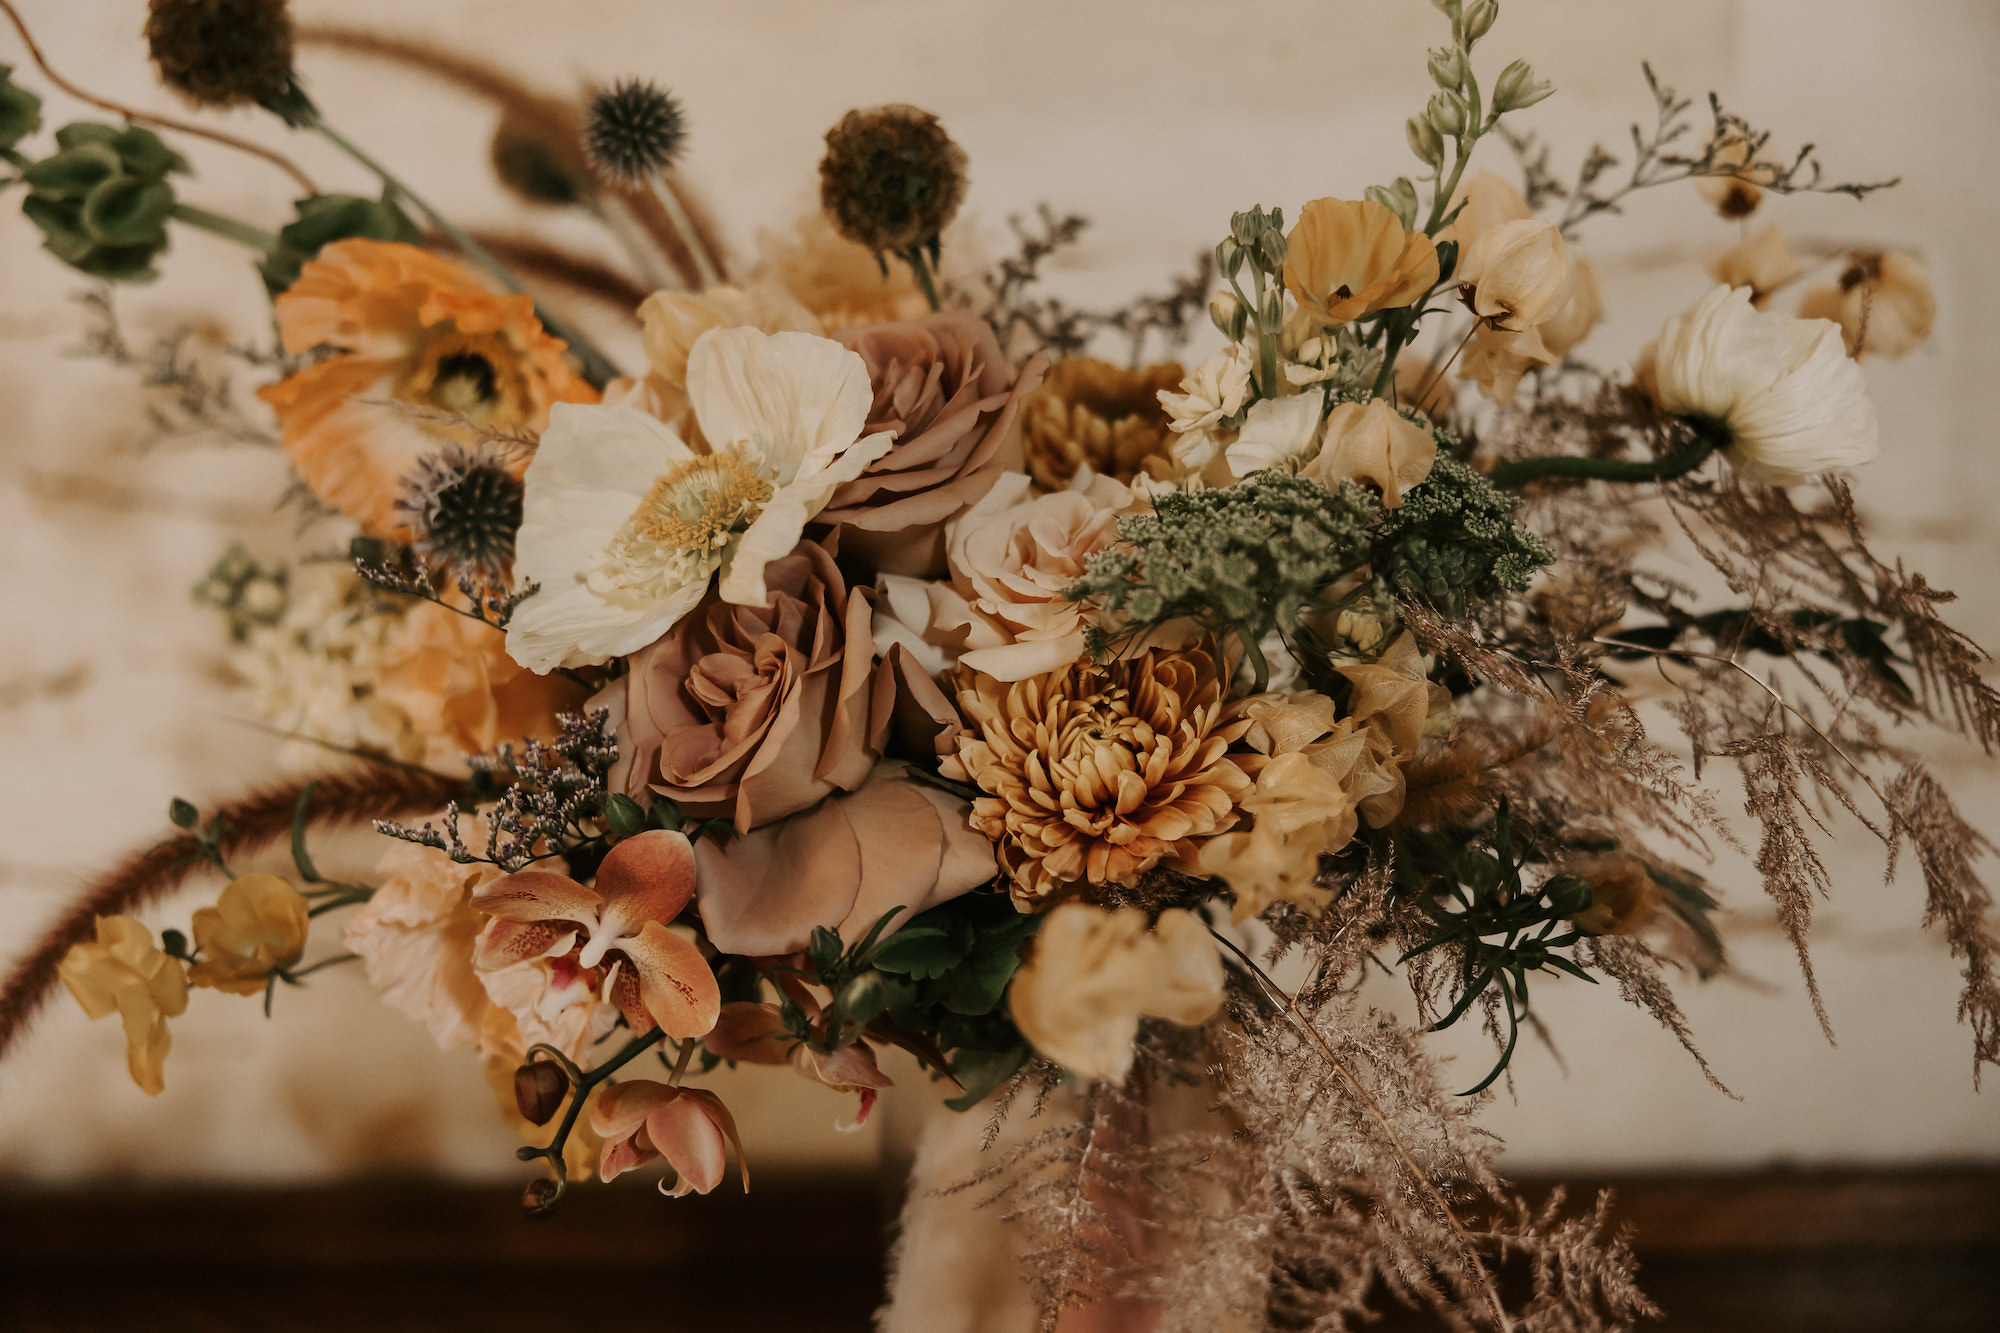 Boho Burnt Orange and Greenery Wedding Bouquet with Dried Florals